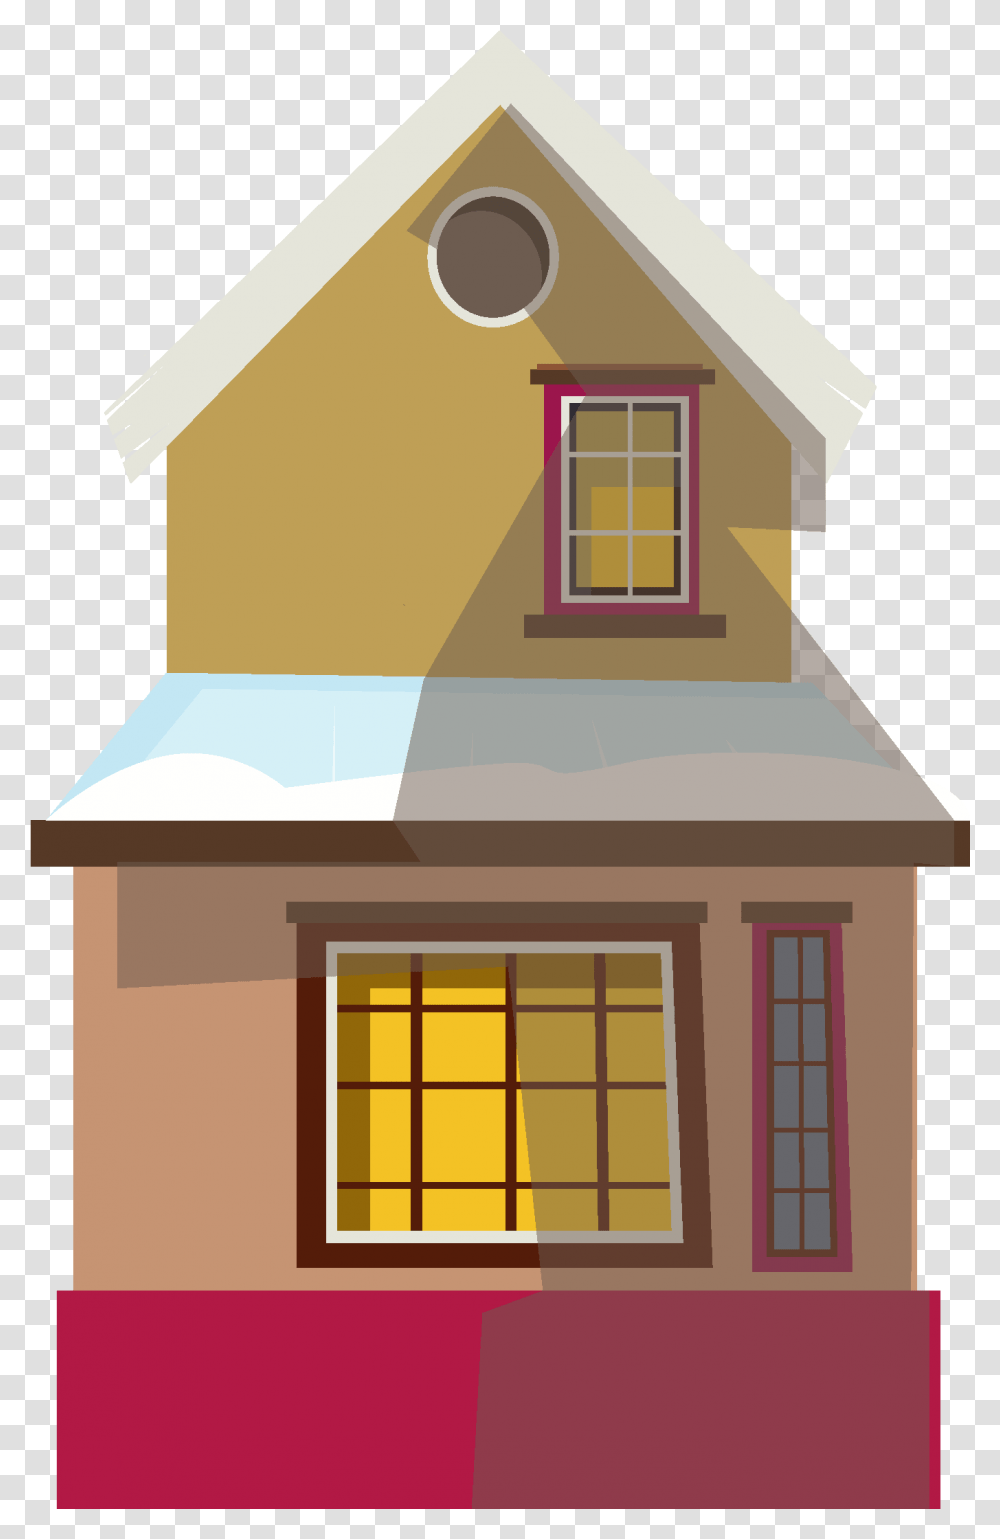 Festive Dreamy Pretty Fashion And Vector Image House, Building, Housing, Window, Outdoors Transparent Png